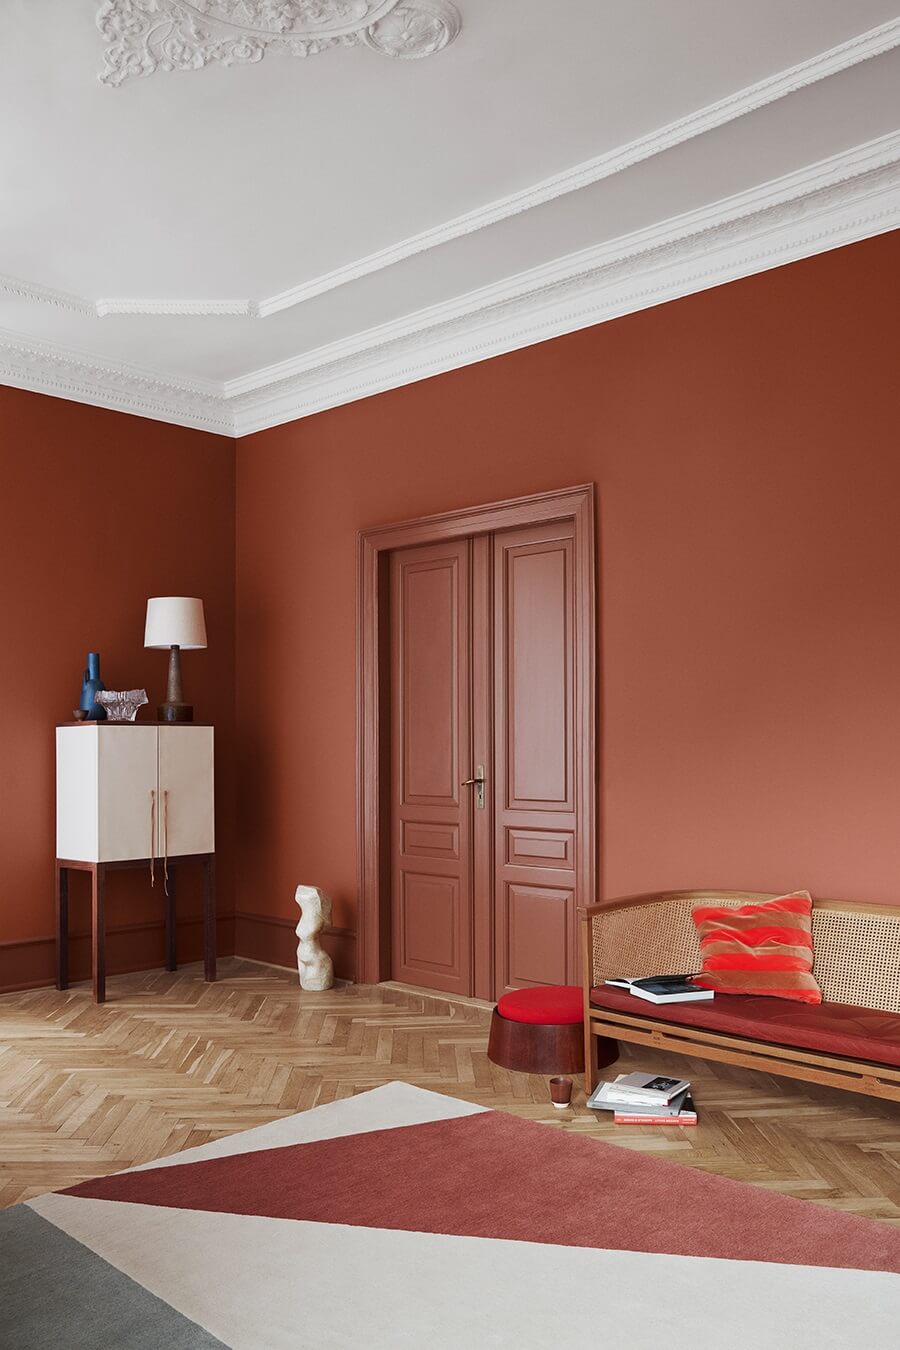 TheNordroom JotunLadyColorTrends20208 The Color Trends For 2020 Are Inspired by Nature